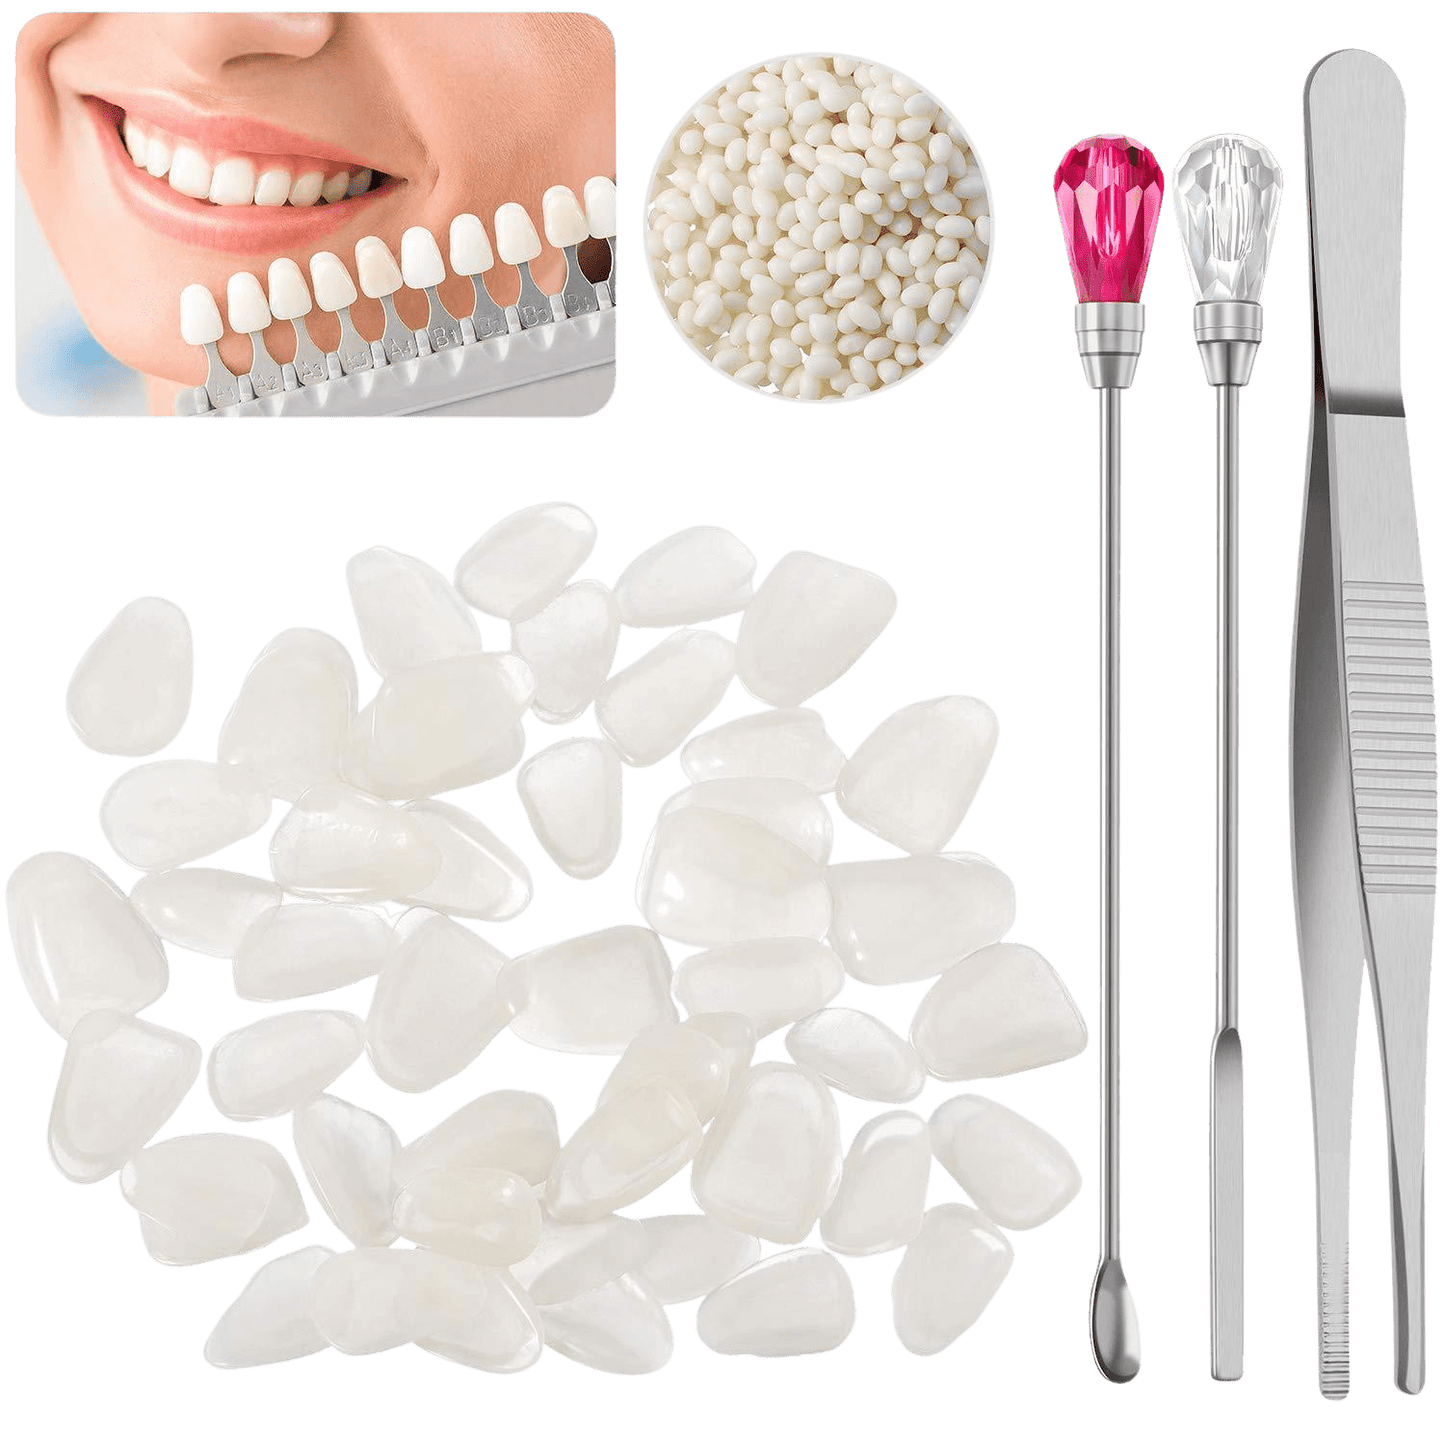 Set of Teeth Veneers with 50g Tooth Solid Gel and Stirring Needle Spoon Temporary Repair Kit Thermal Beads for Halloween Makeup Scary Theme Party Makeup Filling | Decor Gifts and More